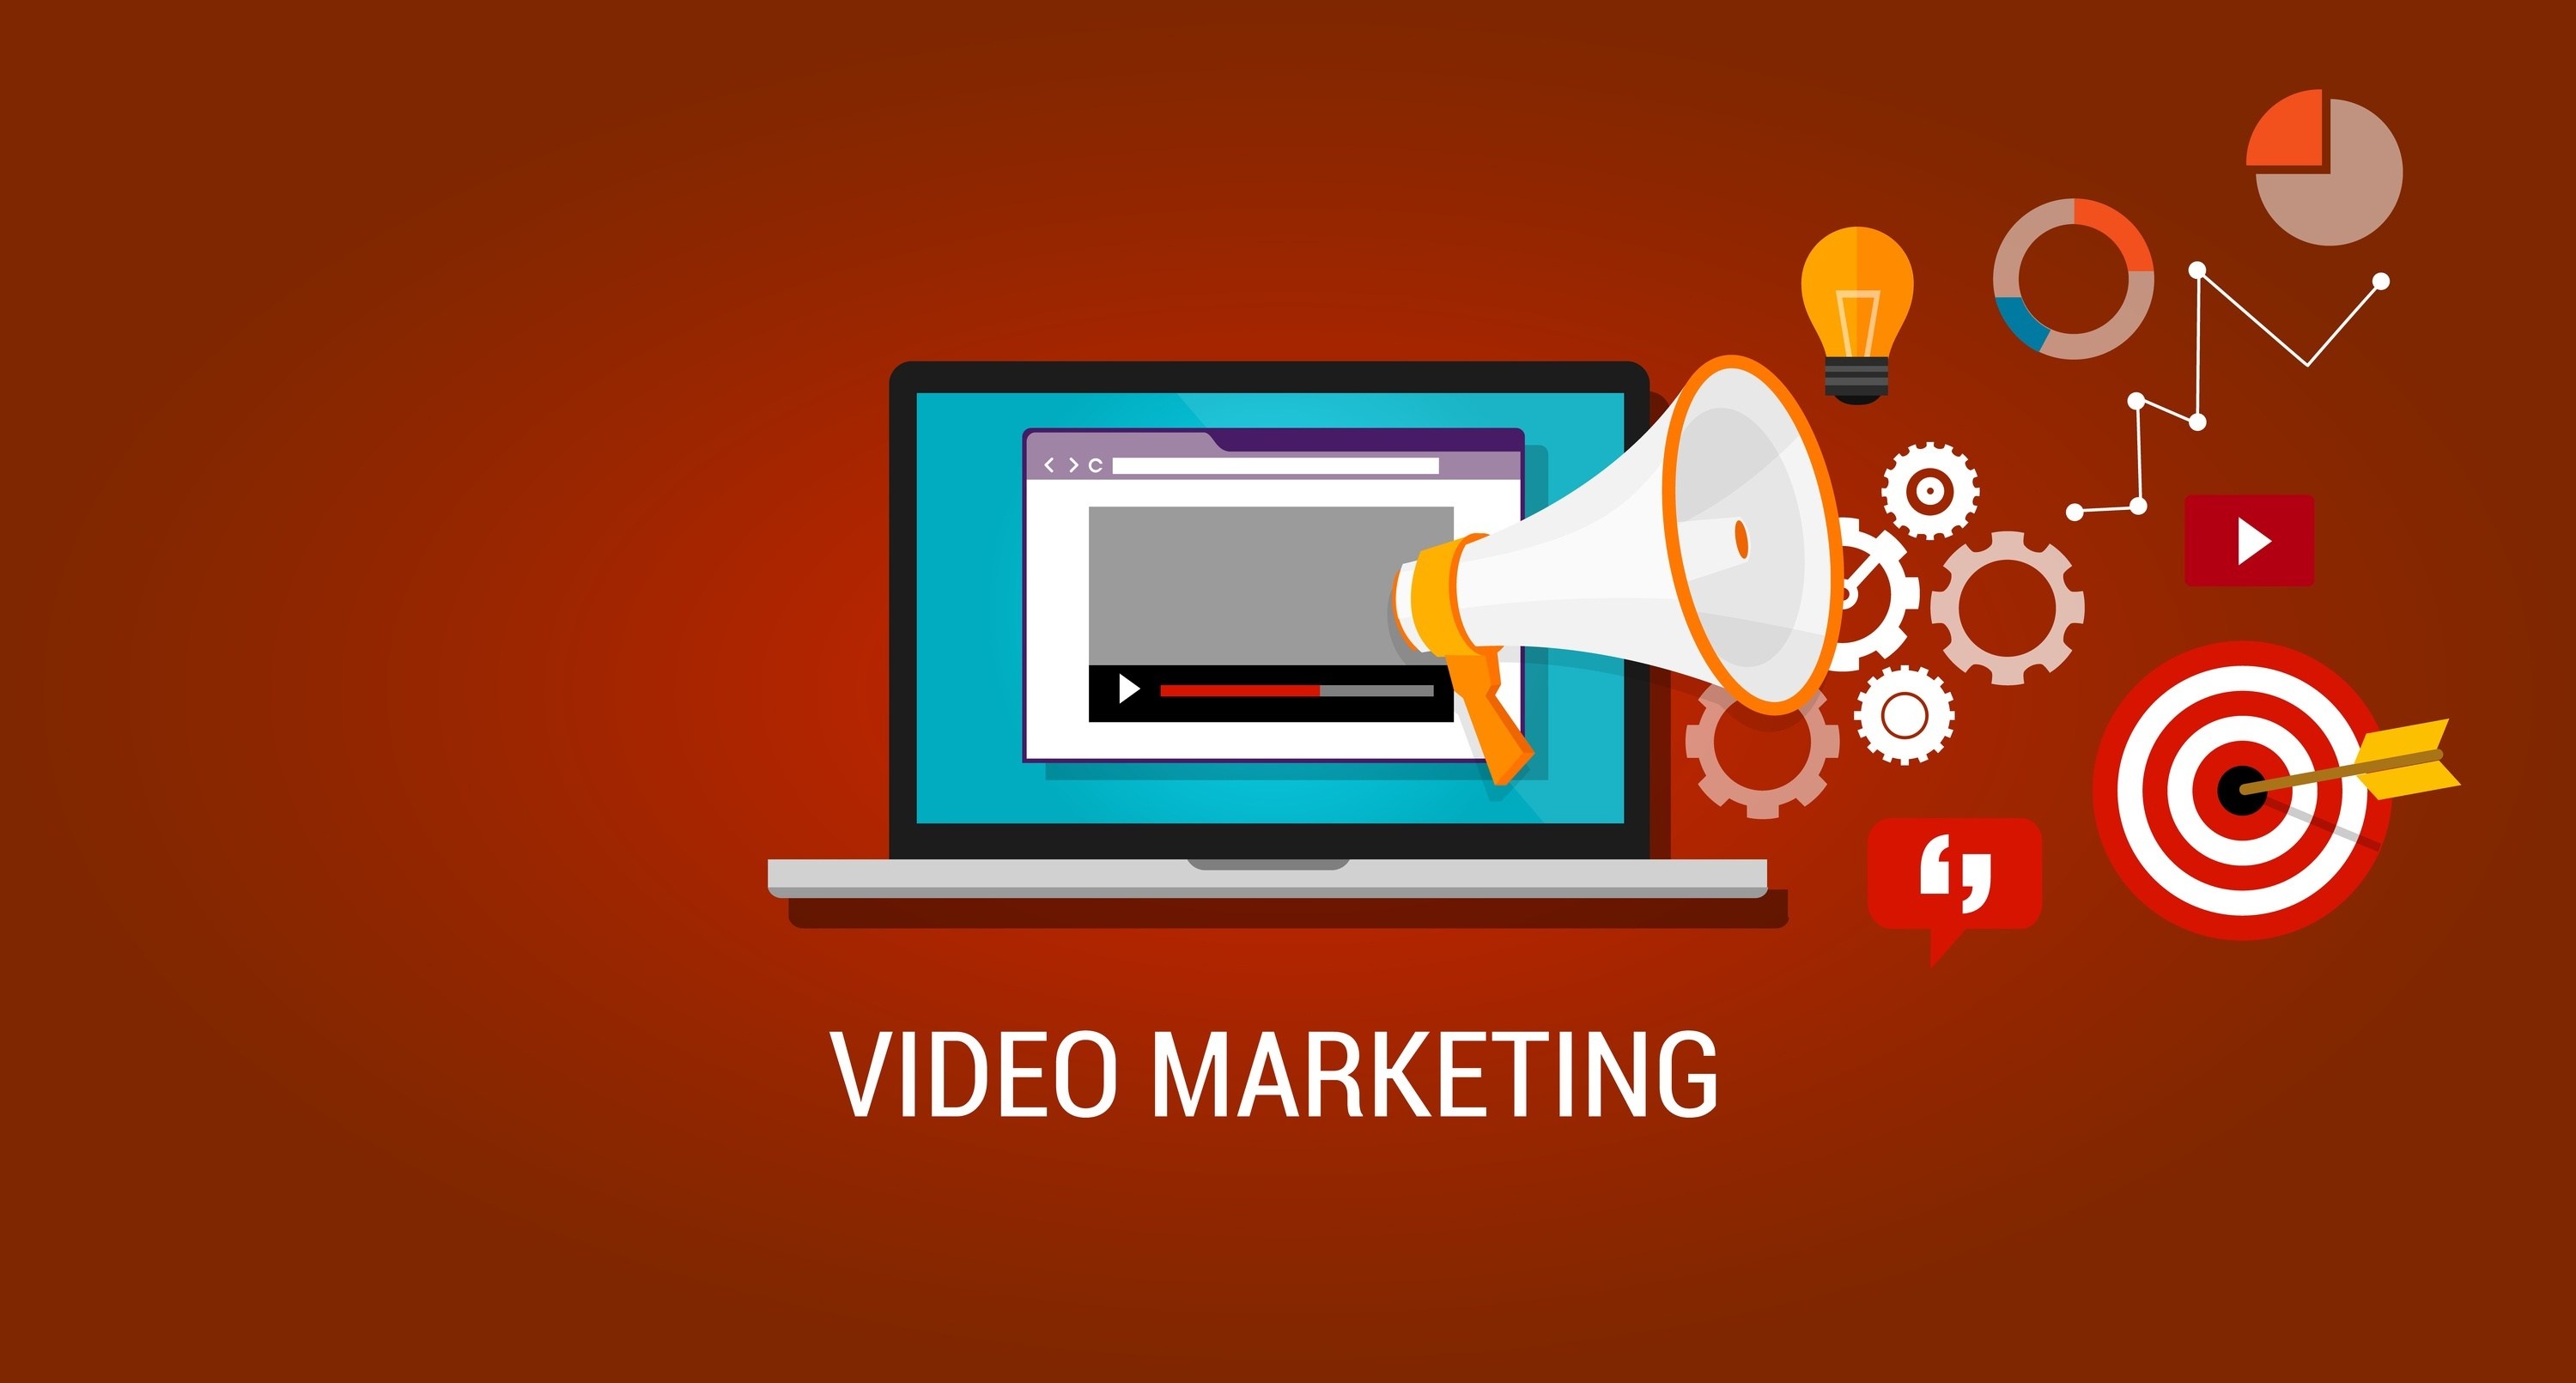 Video Marketing - 7 Tips for New-age Digital Marketing Professionals